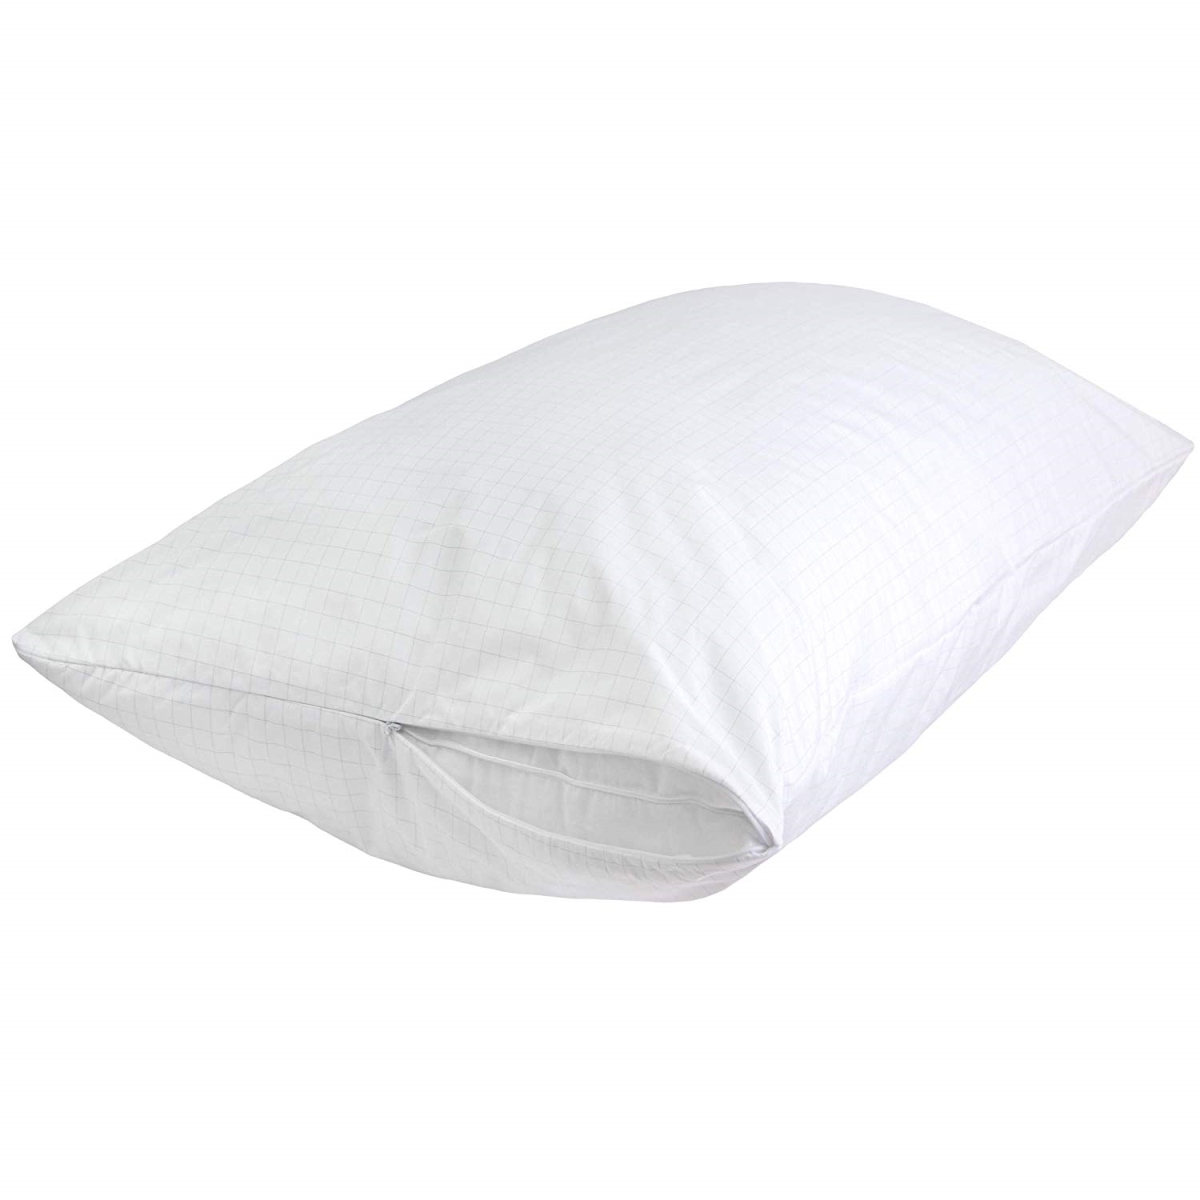 733382 Sleep Solutions By Carbon-infused Waterproof Pillow Protector, White - Standard Size